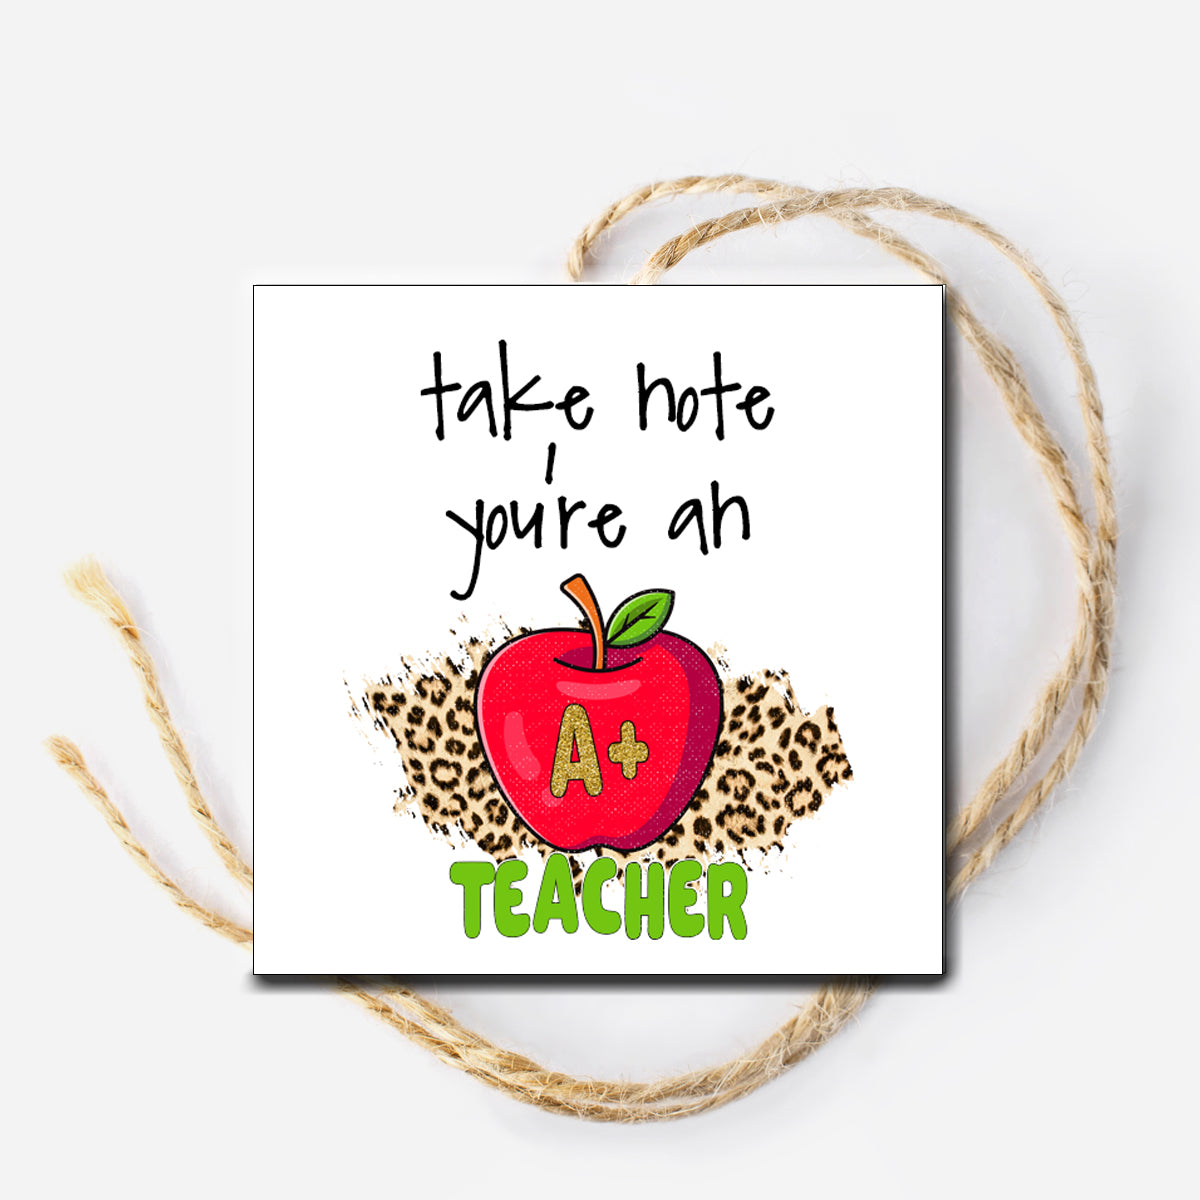 A+ Teacher Instant Download Tag